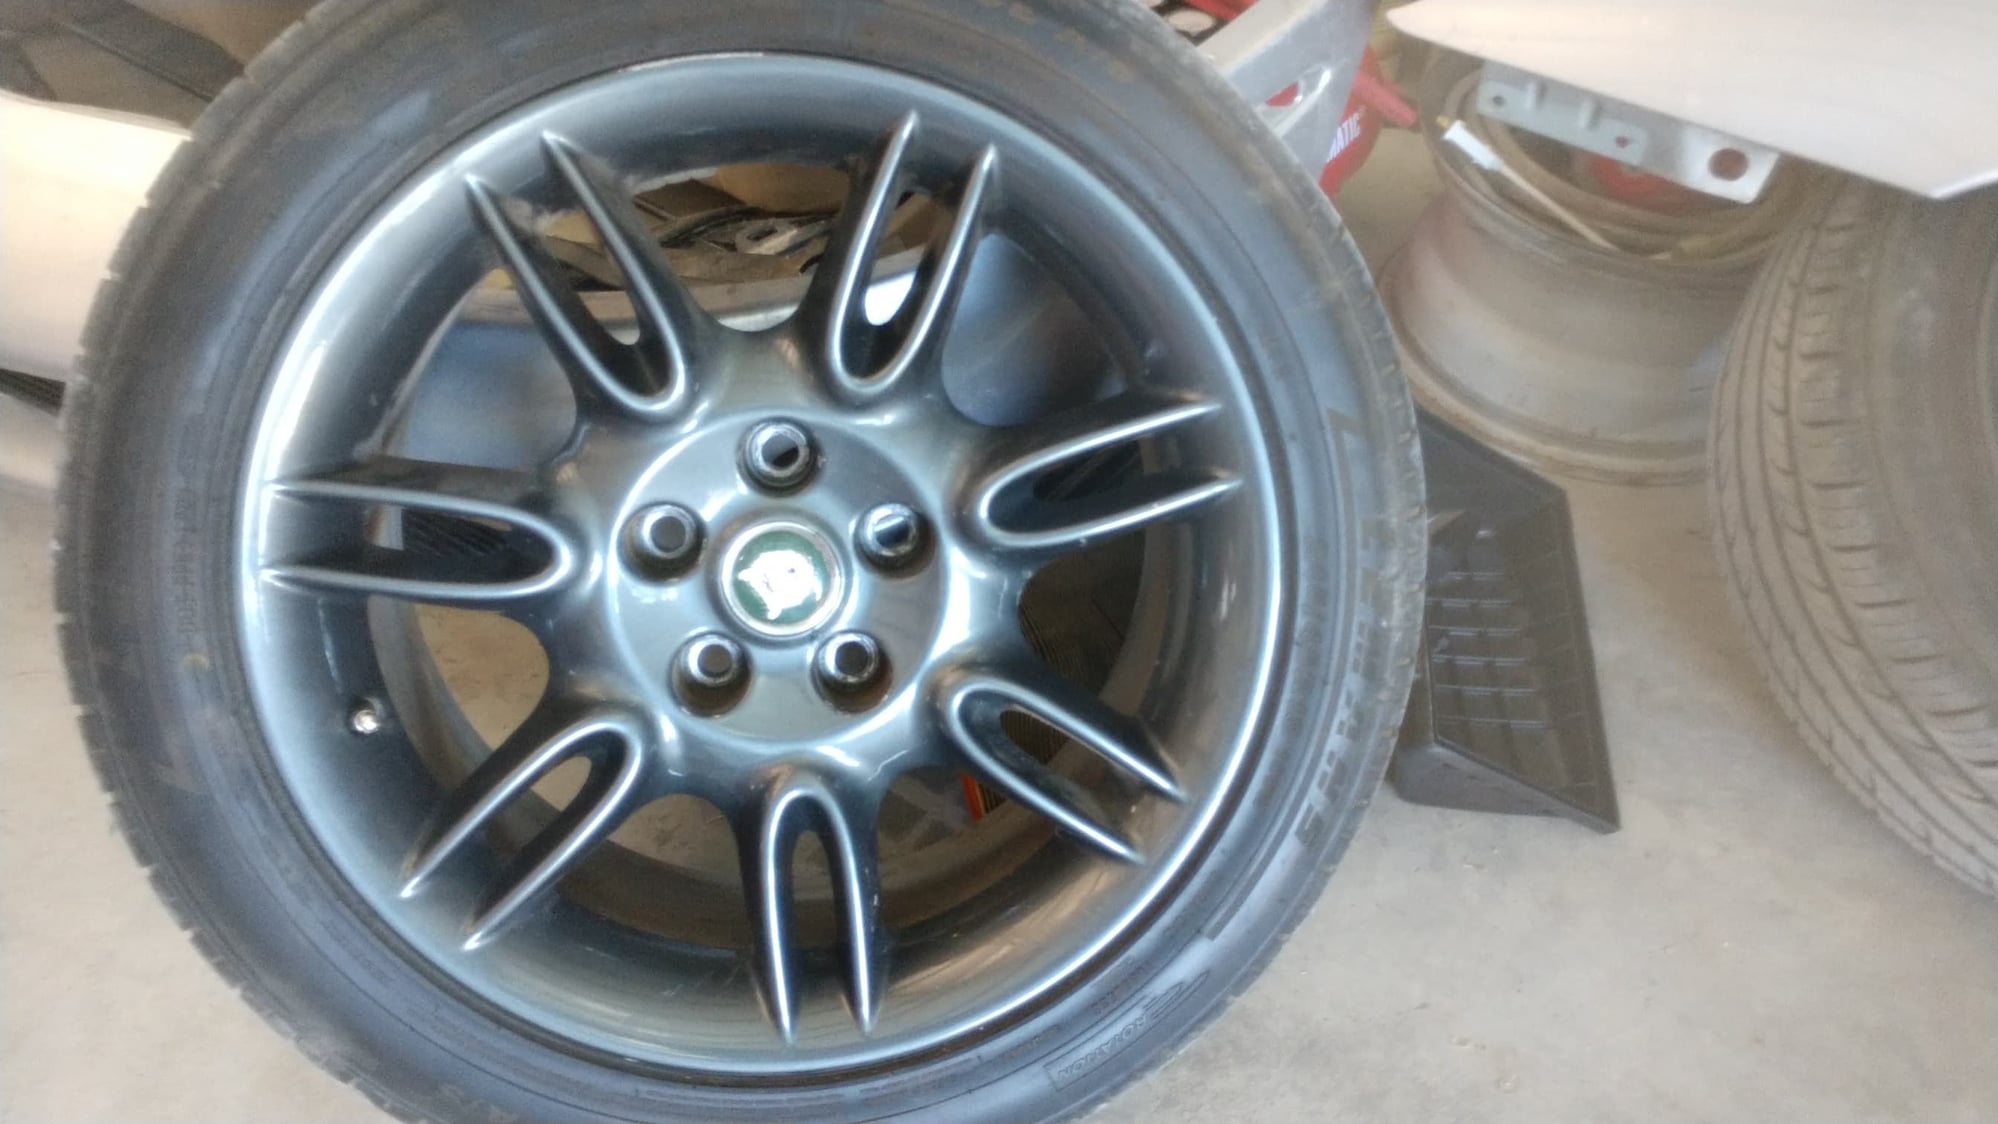 2001 Jaguar XKR - Parting out 2001 XKR - Wheels and Tires/Axles - $600 - Lago Vista, TX 78645, United States